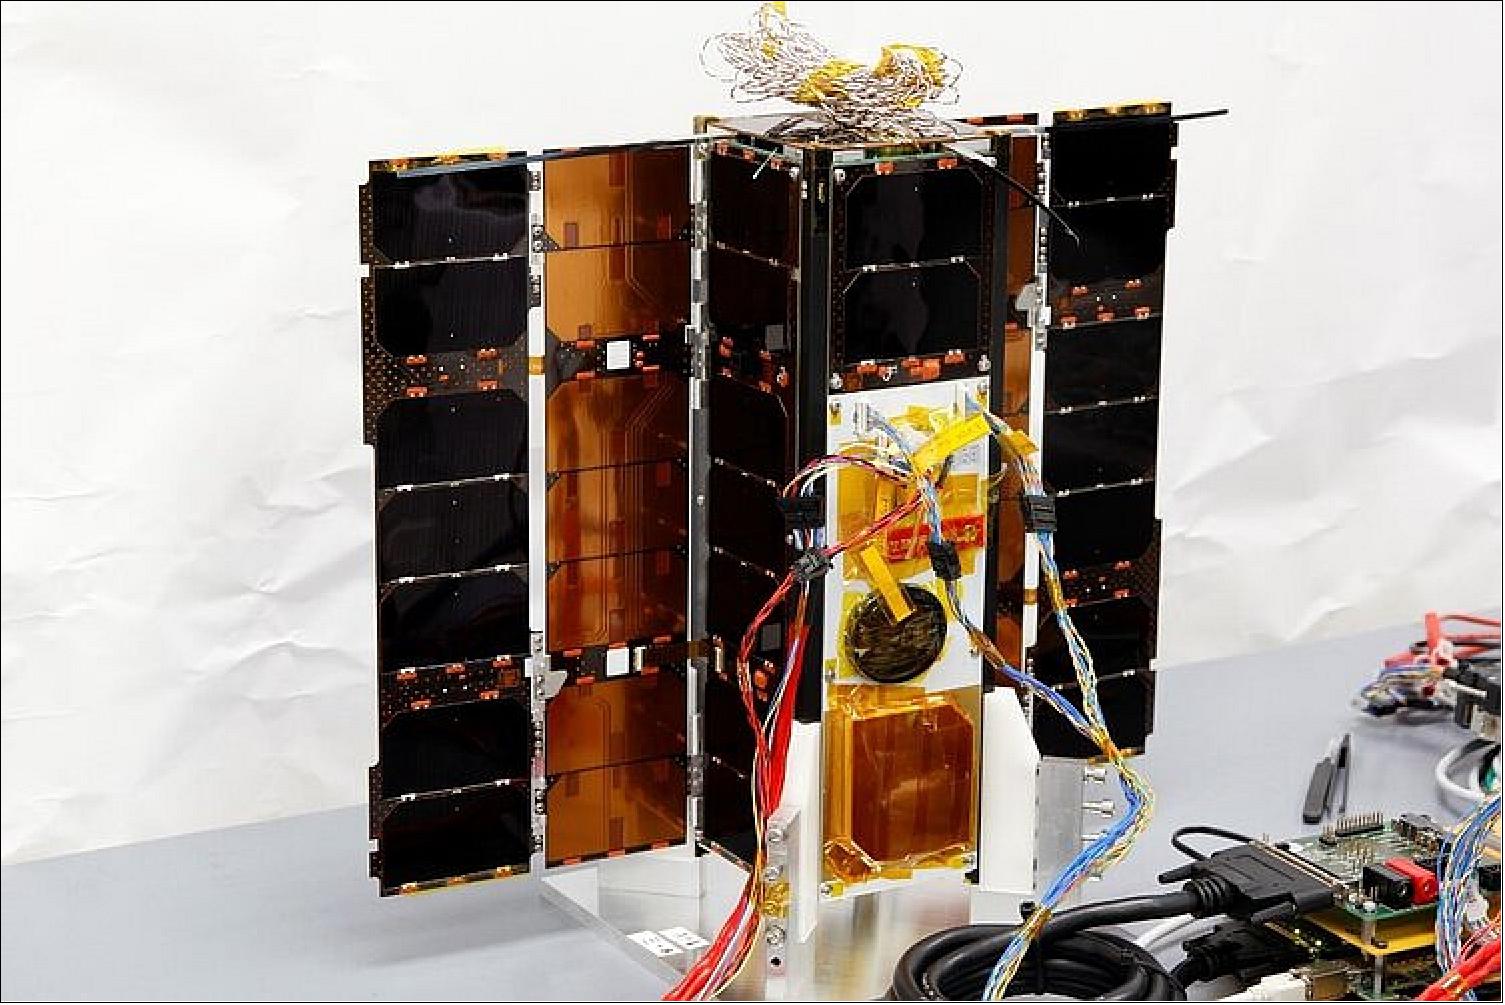 Figure 9: OPS-SAT during testing of its solar arrays at the Graz University of Technology, Austria (image credit: TU Graz)